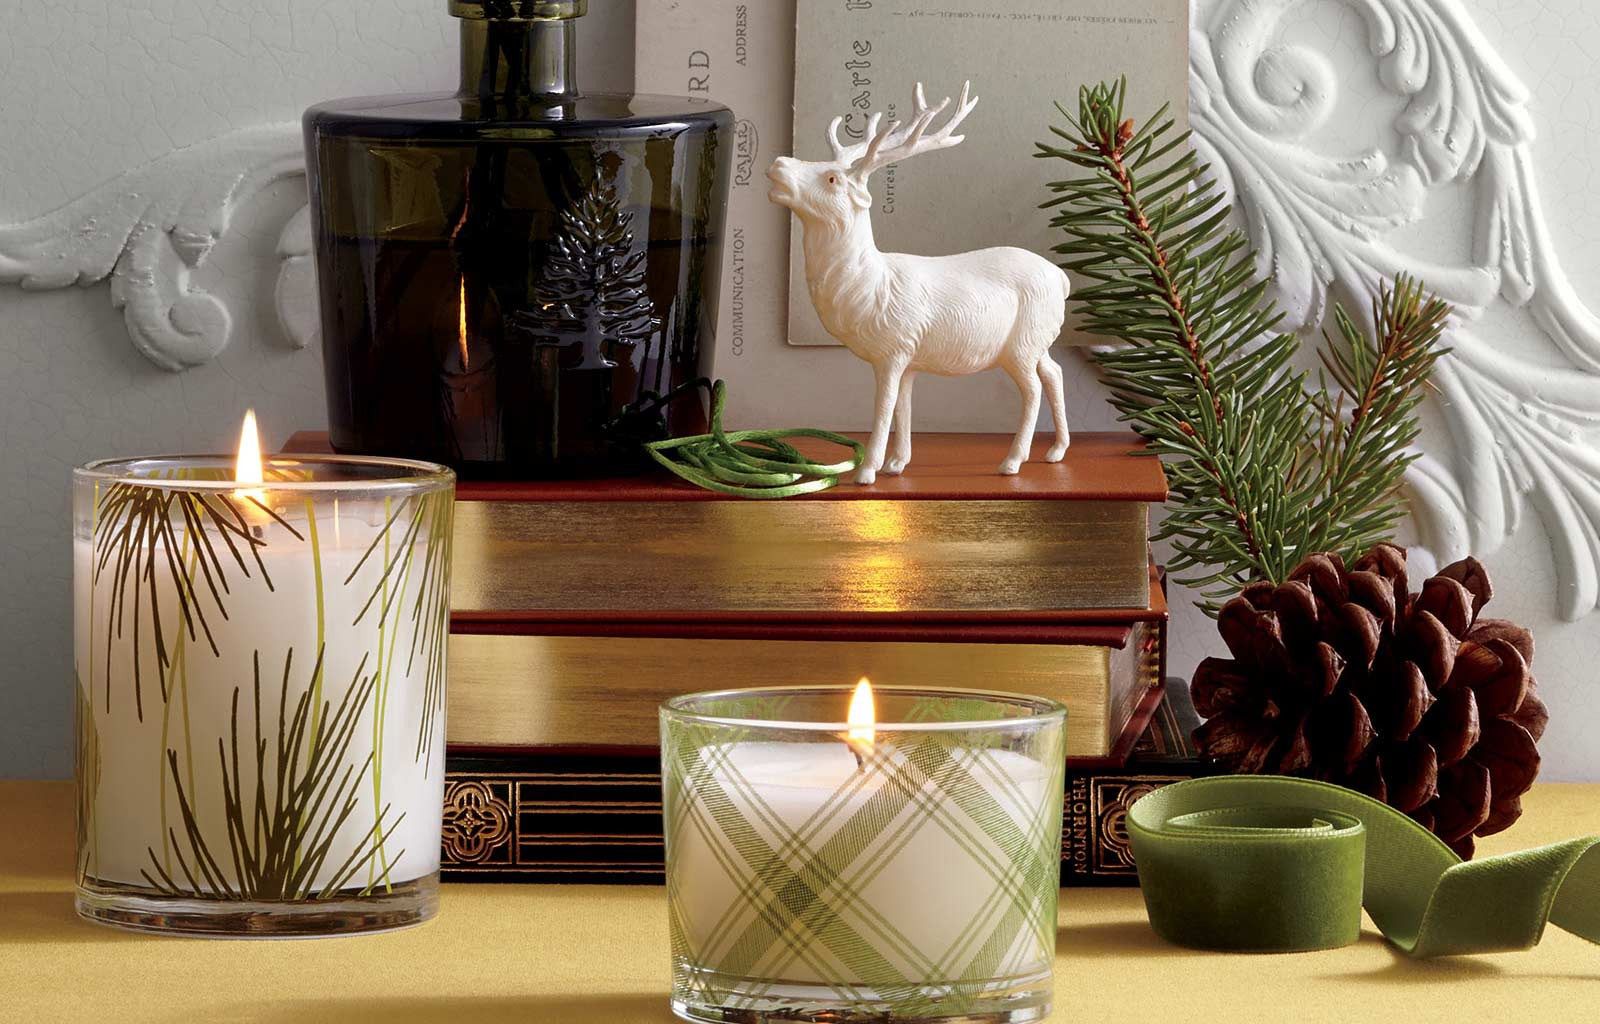 15 Best Christmas Candles for 2020 - Best Smelling Holiday Candles